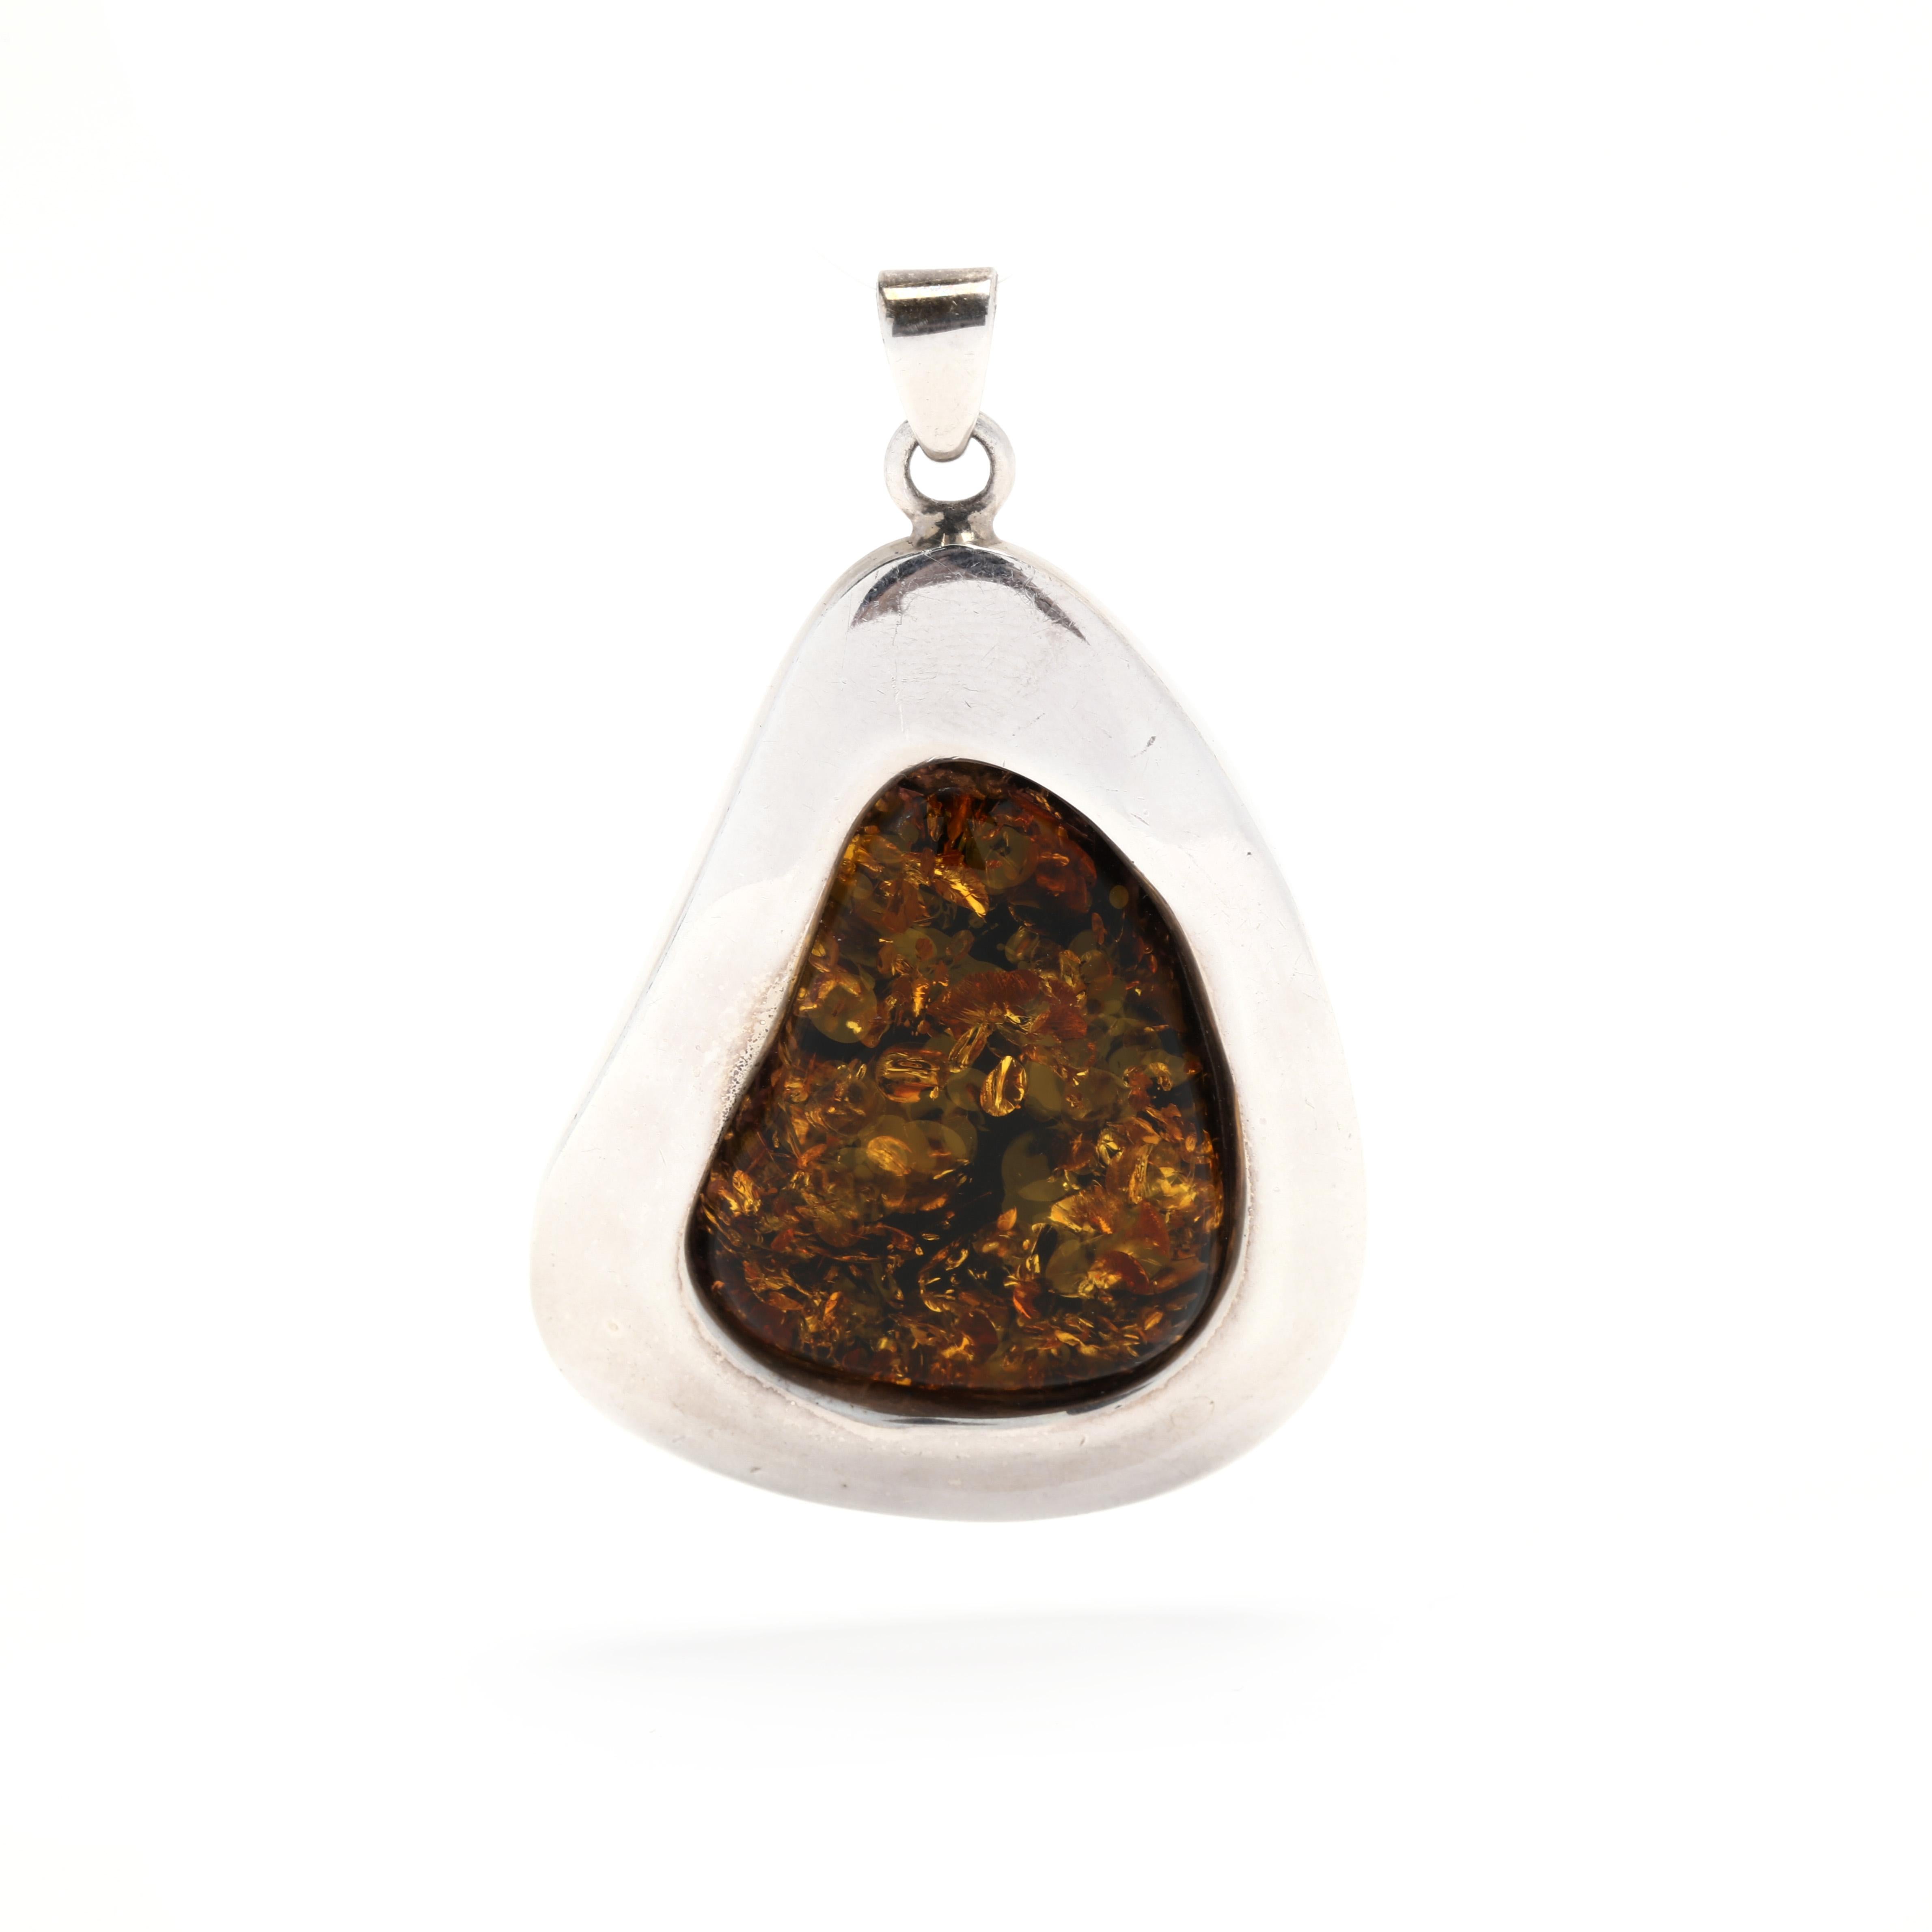 This unique amber pendant is a beautiful and bold statement piece made of sterling silver and freeform amber. Measuring 2 1/4 inches long, it is the perfect accessory to add a touch of elegance to any outfit. The amber gives off a warm, golden glow